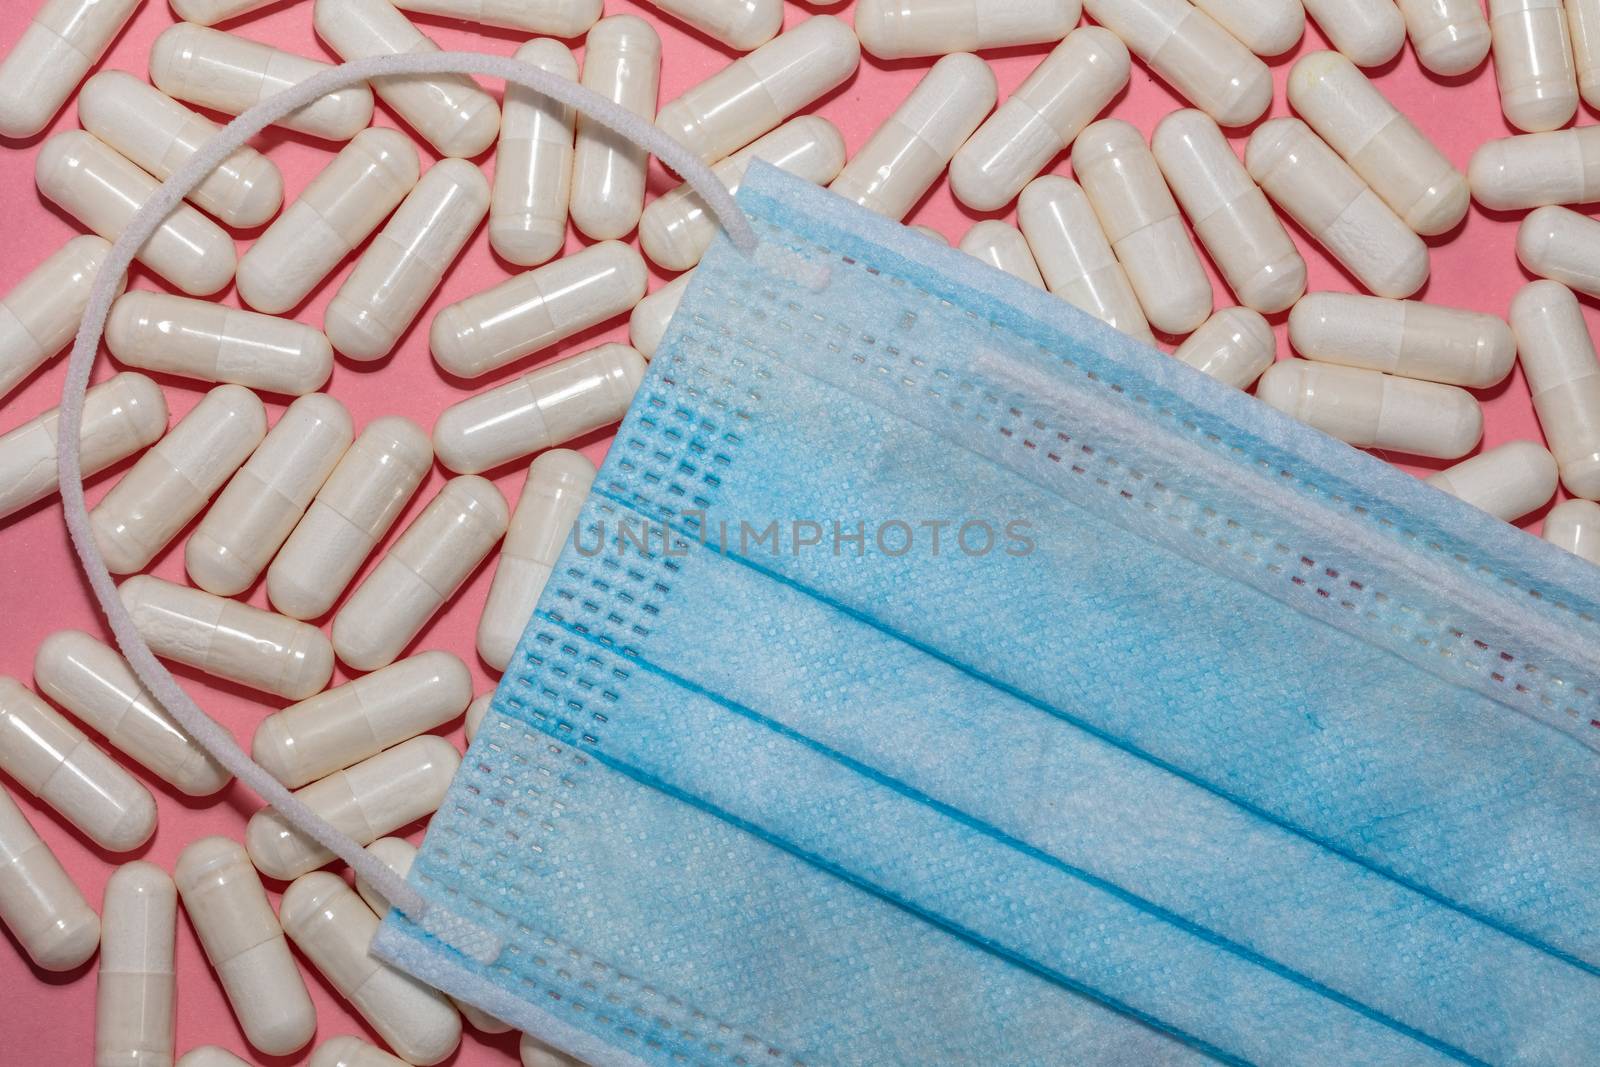 Top close up shot of white pills and blue medical mask on top of them on pink background. Healthcare, medical and pharmaceutical concept. New normal and reality concept.